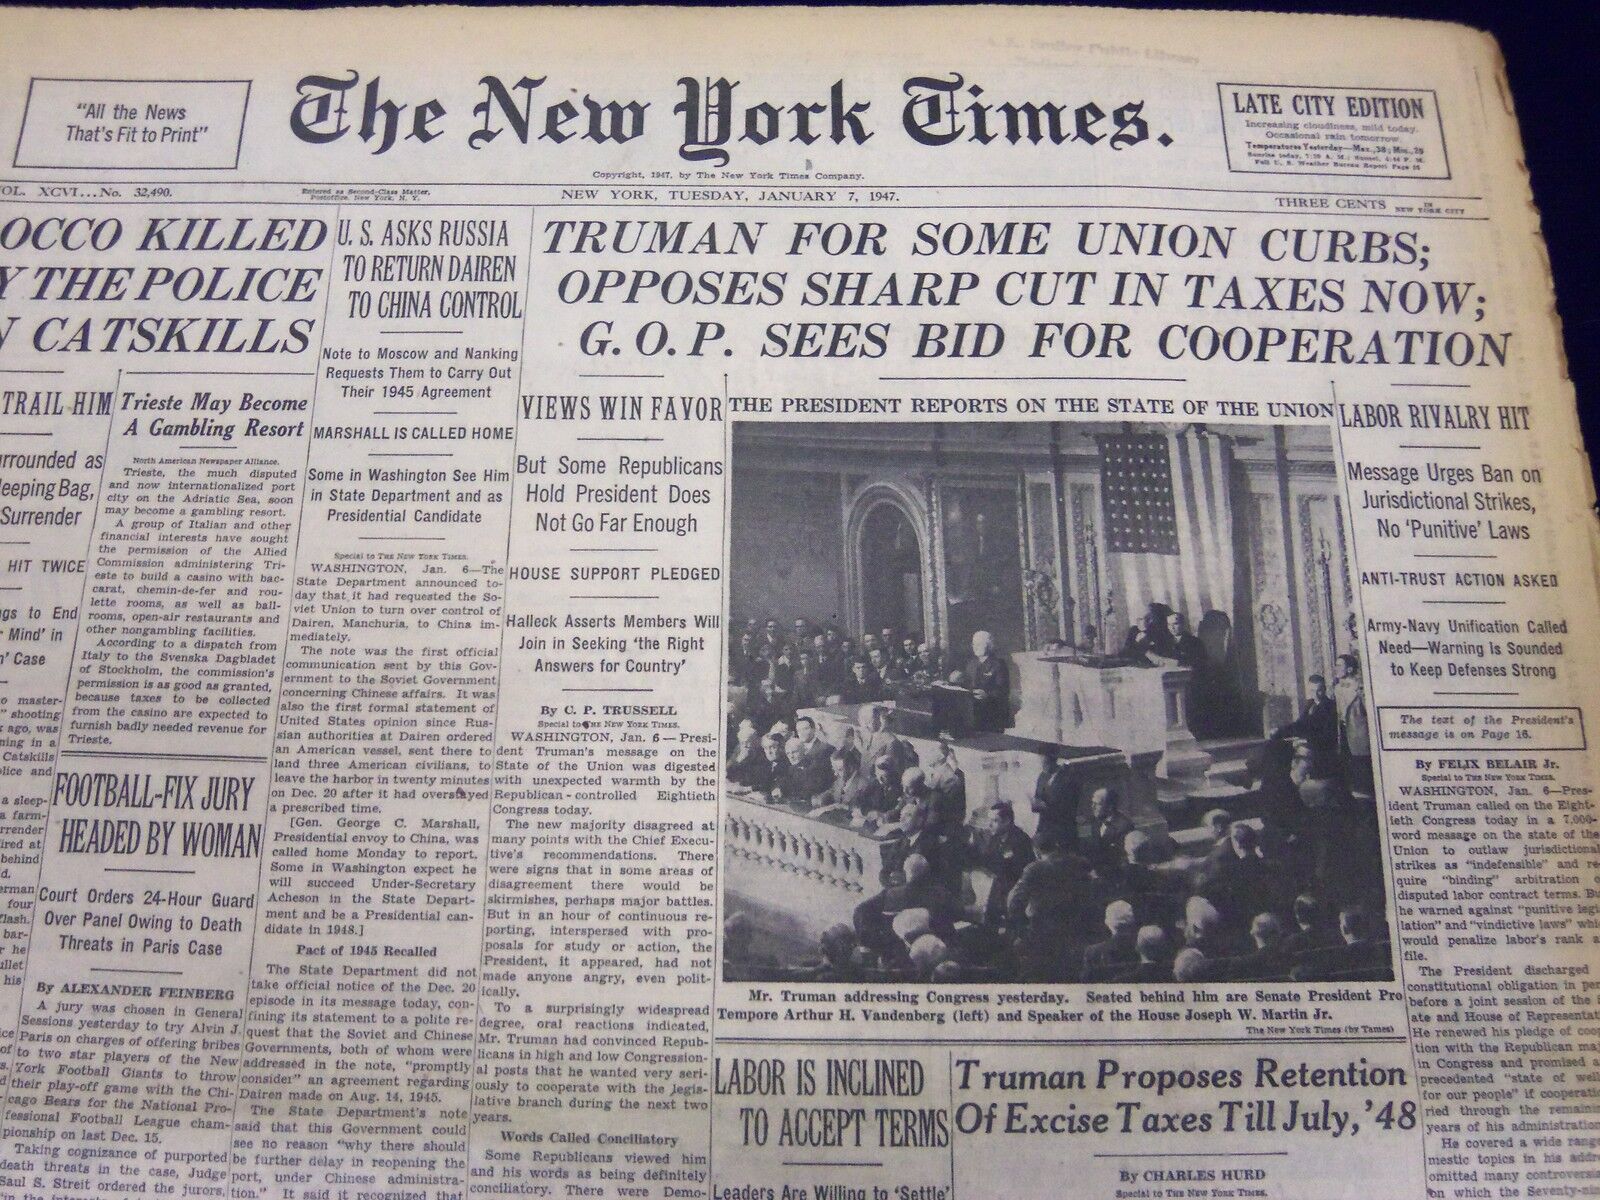 1947 JAN 7 NEW YORK TIMES - TRUMAN FOR SOME UNION CURBS - ROCCO KILLED - NT 102